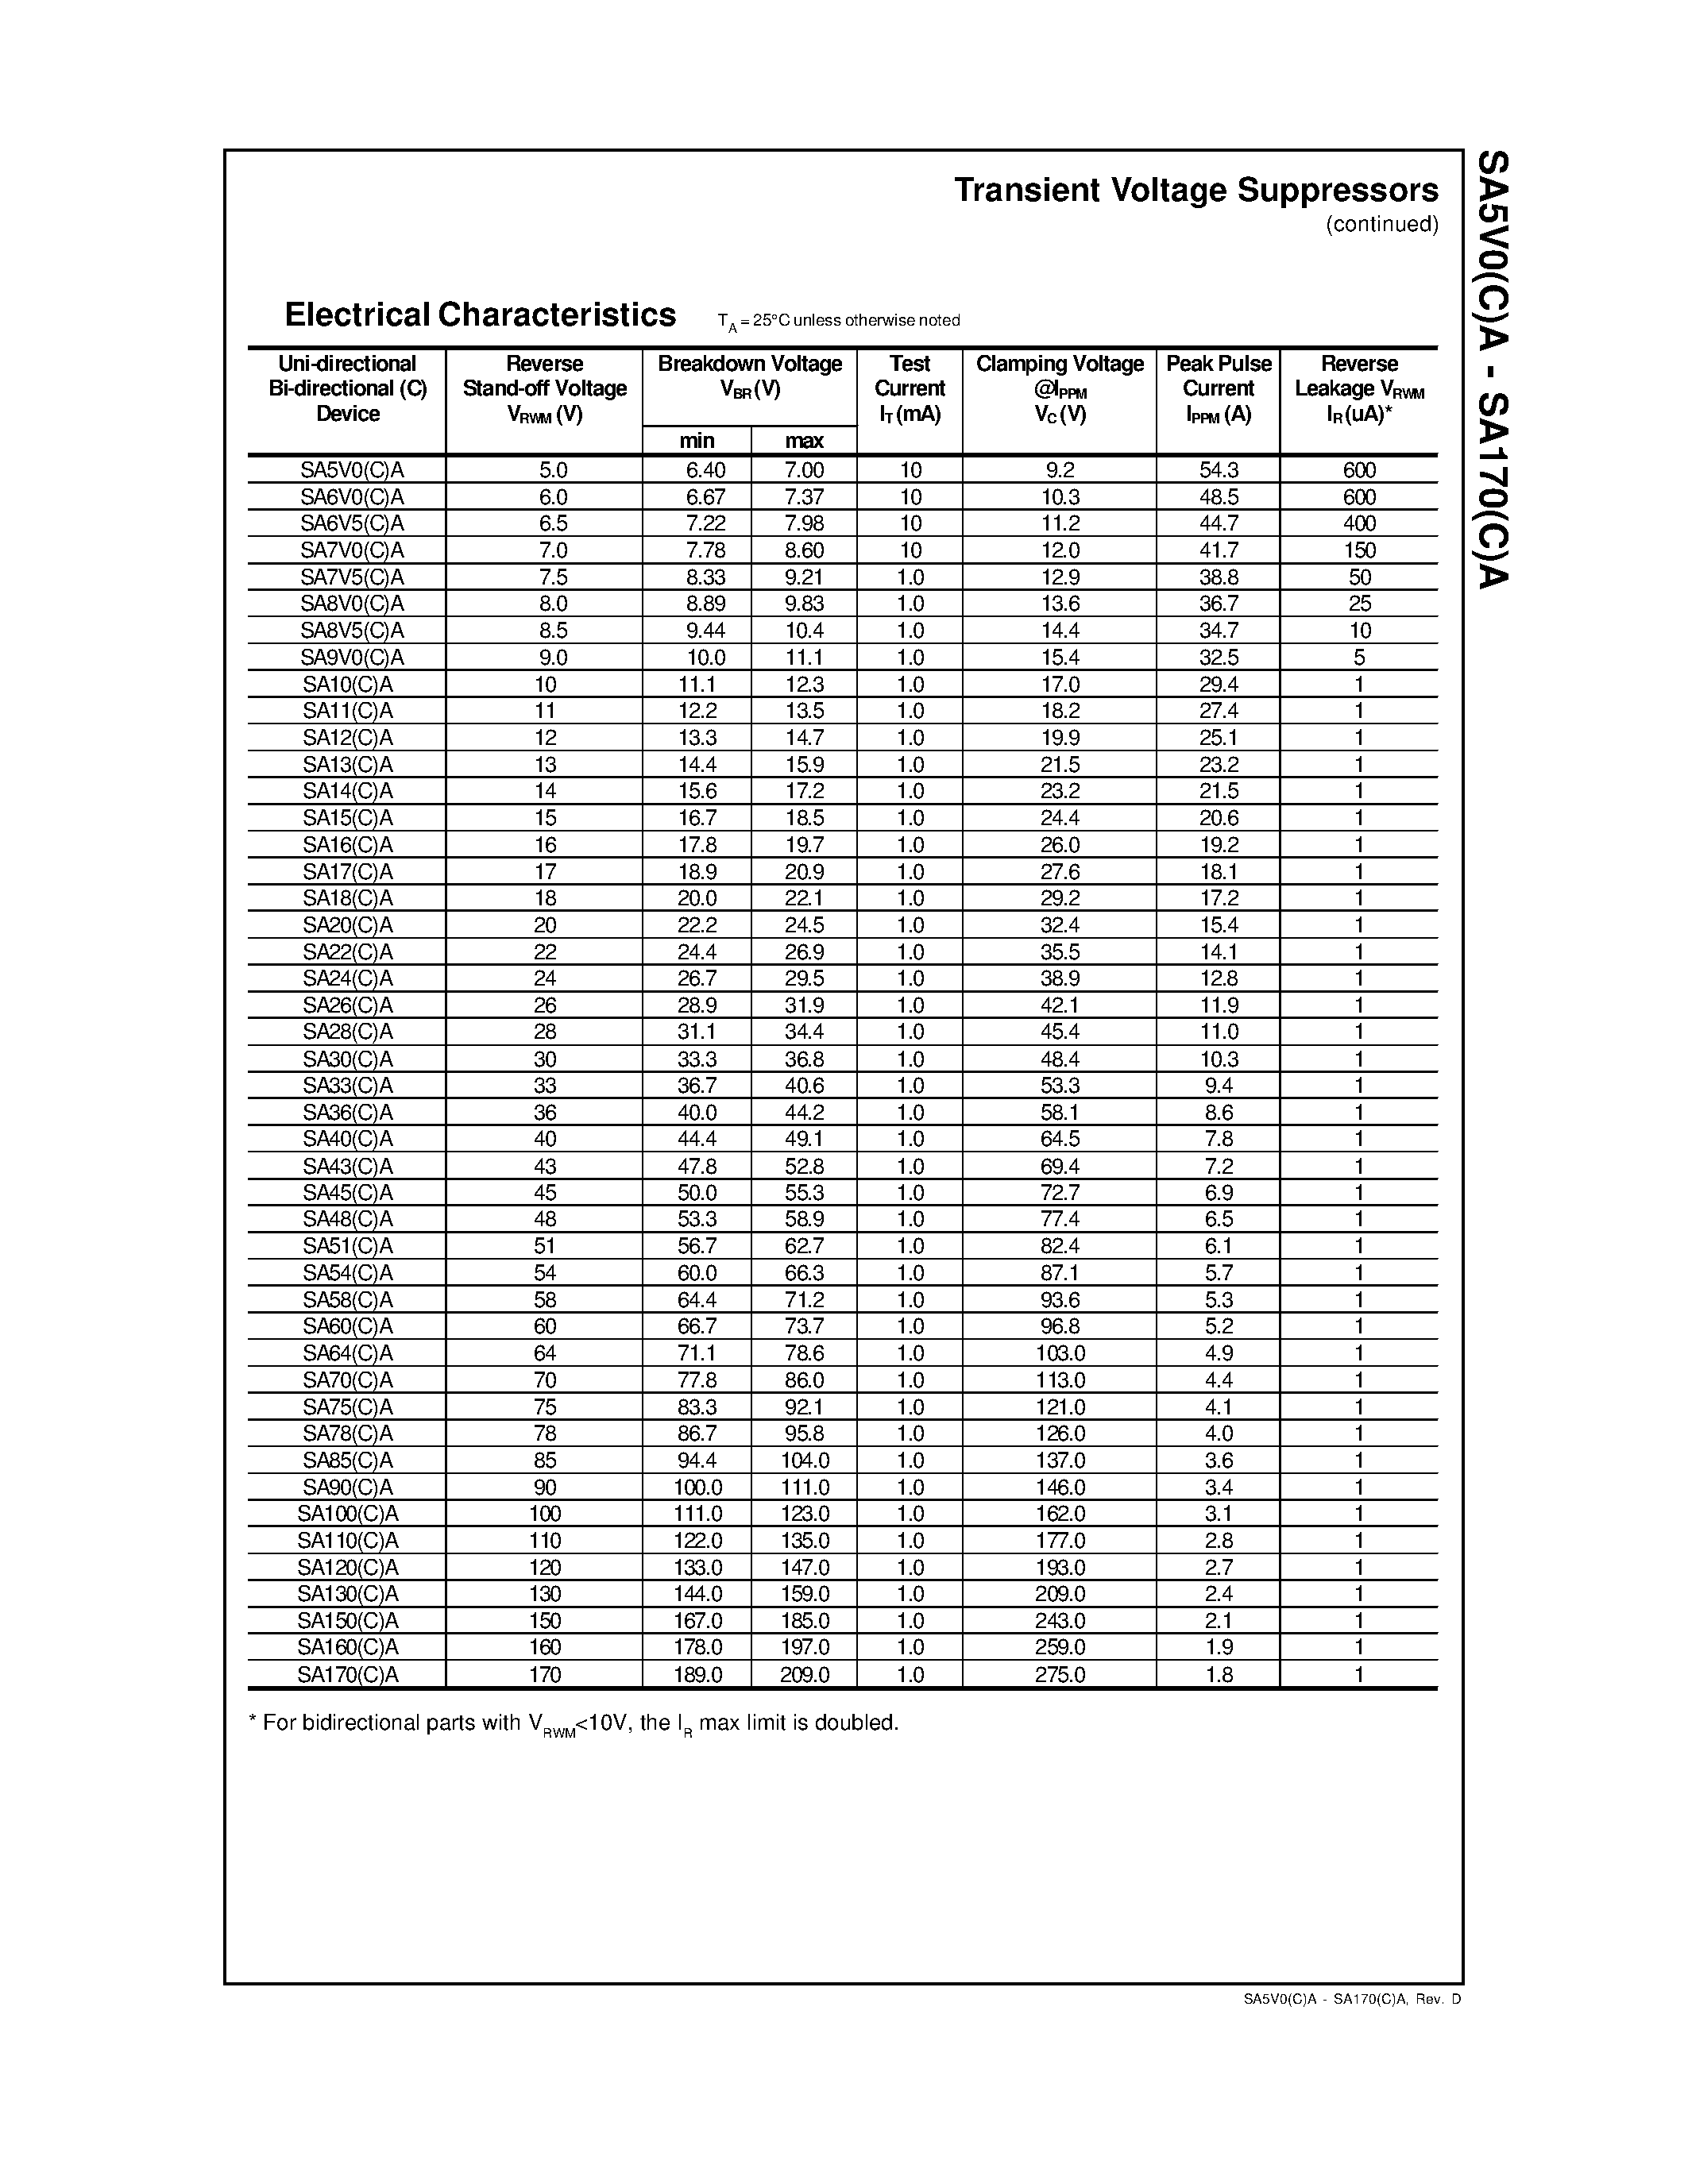 Datasheet SA30A - Transient Voltage Suppressors page 2